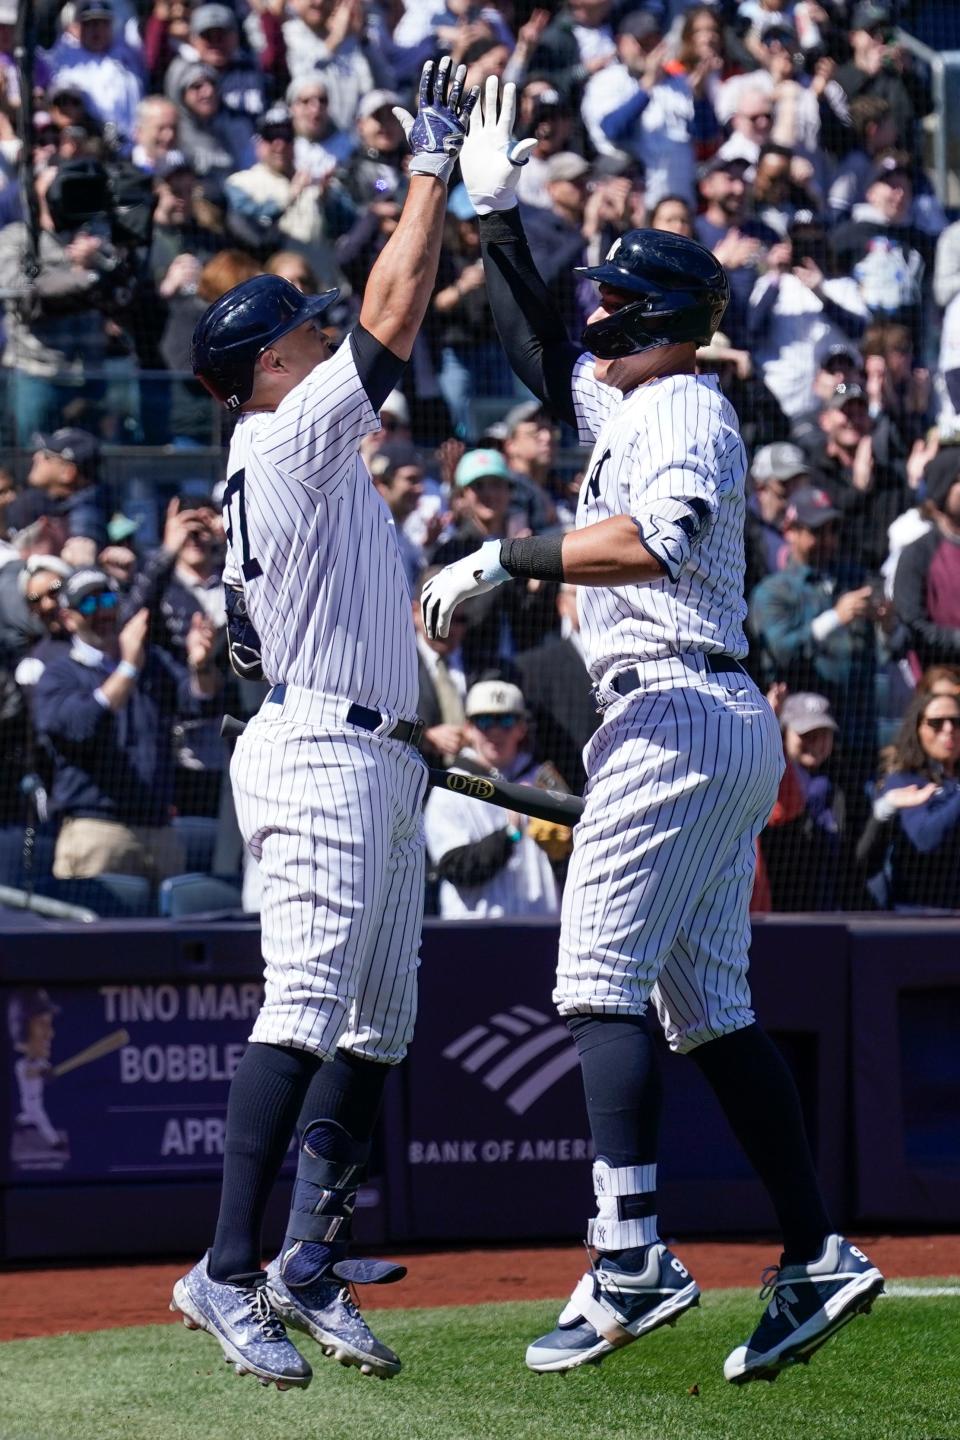 New York Yankees' Aaron Judge, right, celebrates his solo home run with Giancarlo Stanton (27) during the first inning of a baseball game against the San Francisco Giants at Yankee Stadium Thursday, March 30, 2023, in New York. (AP Photo/Seth Wenig)